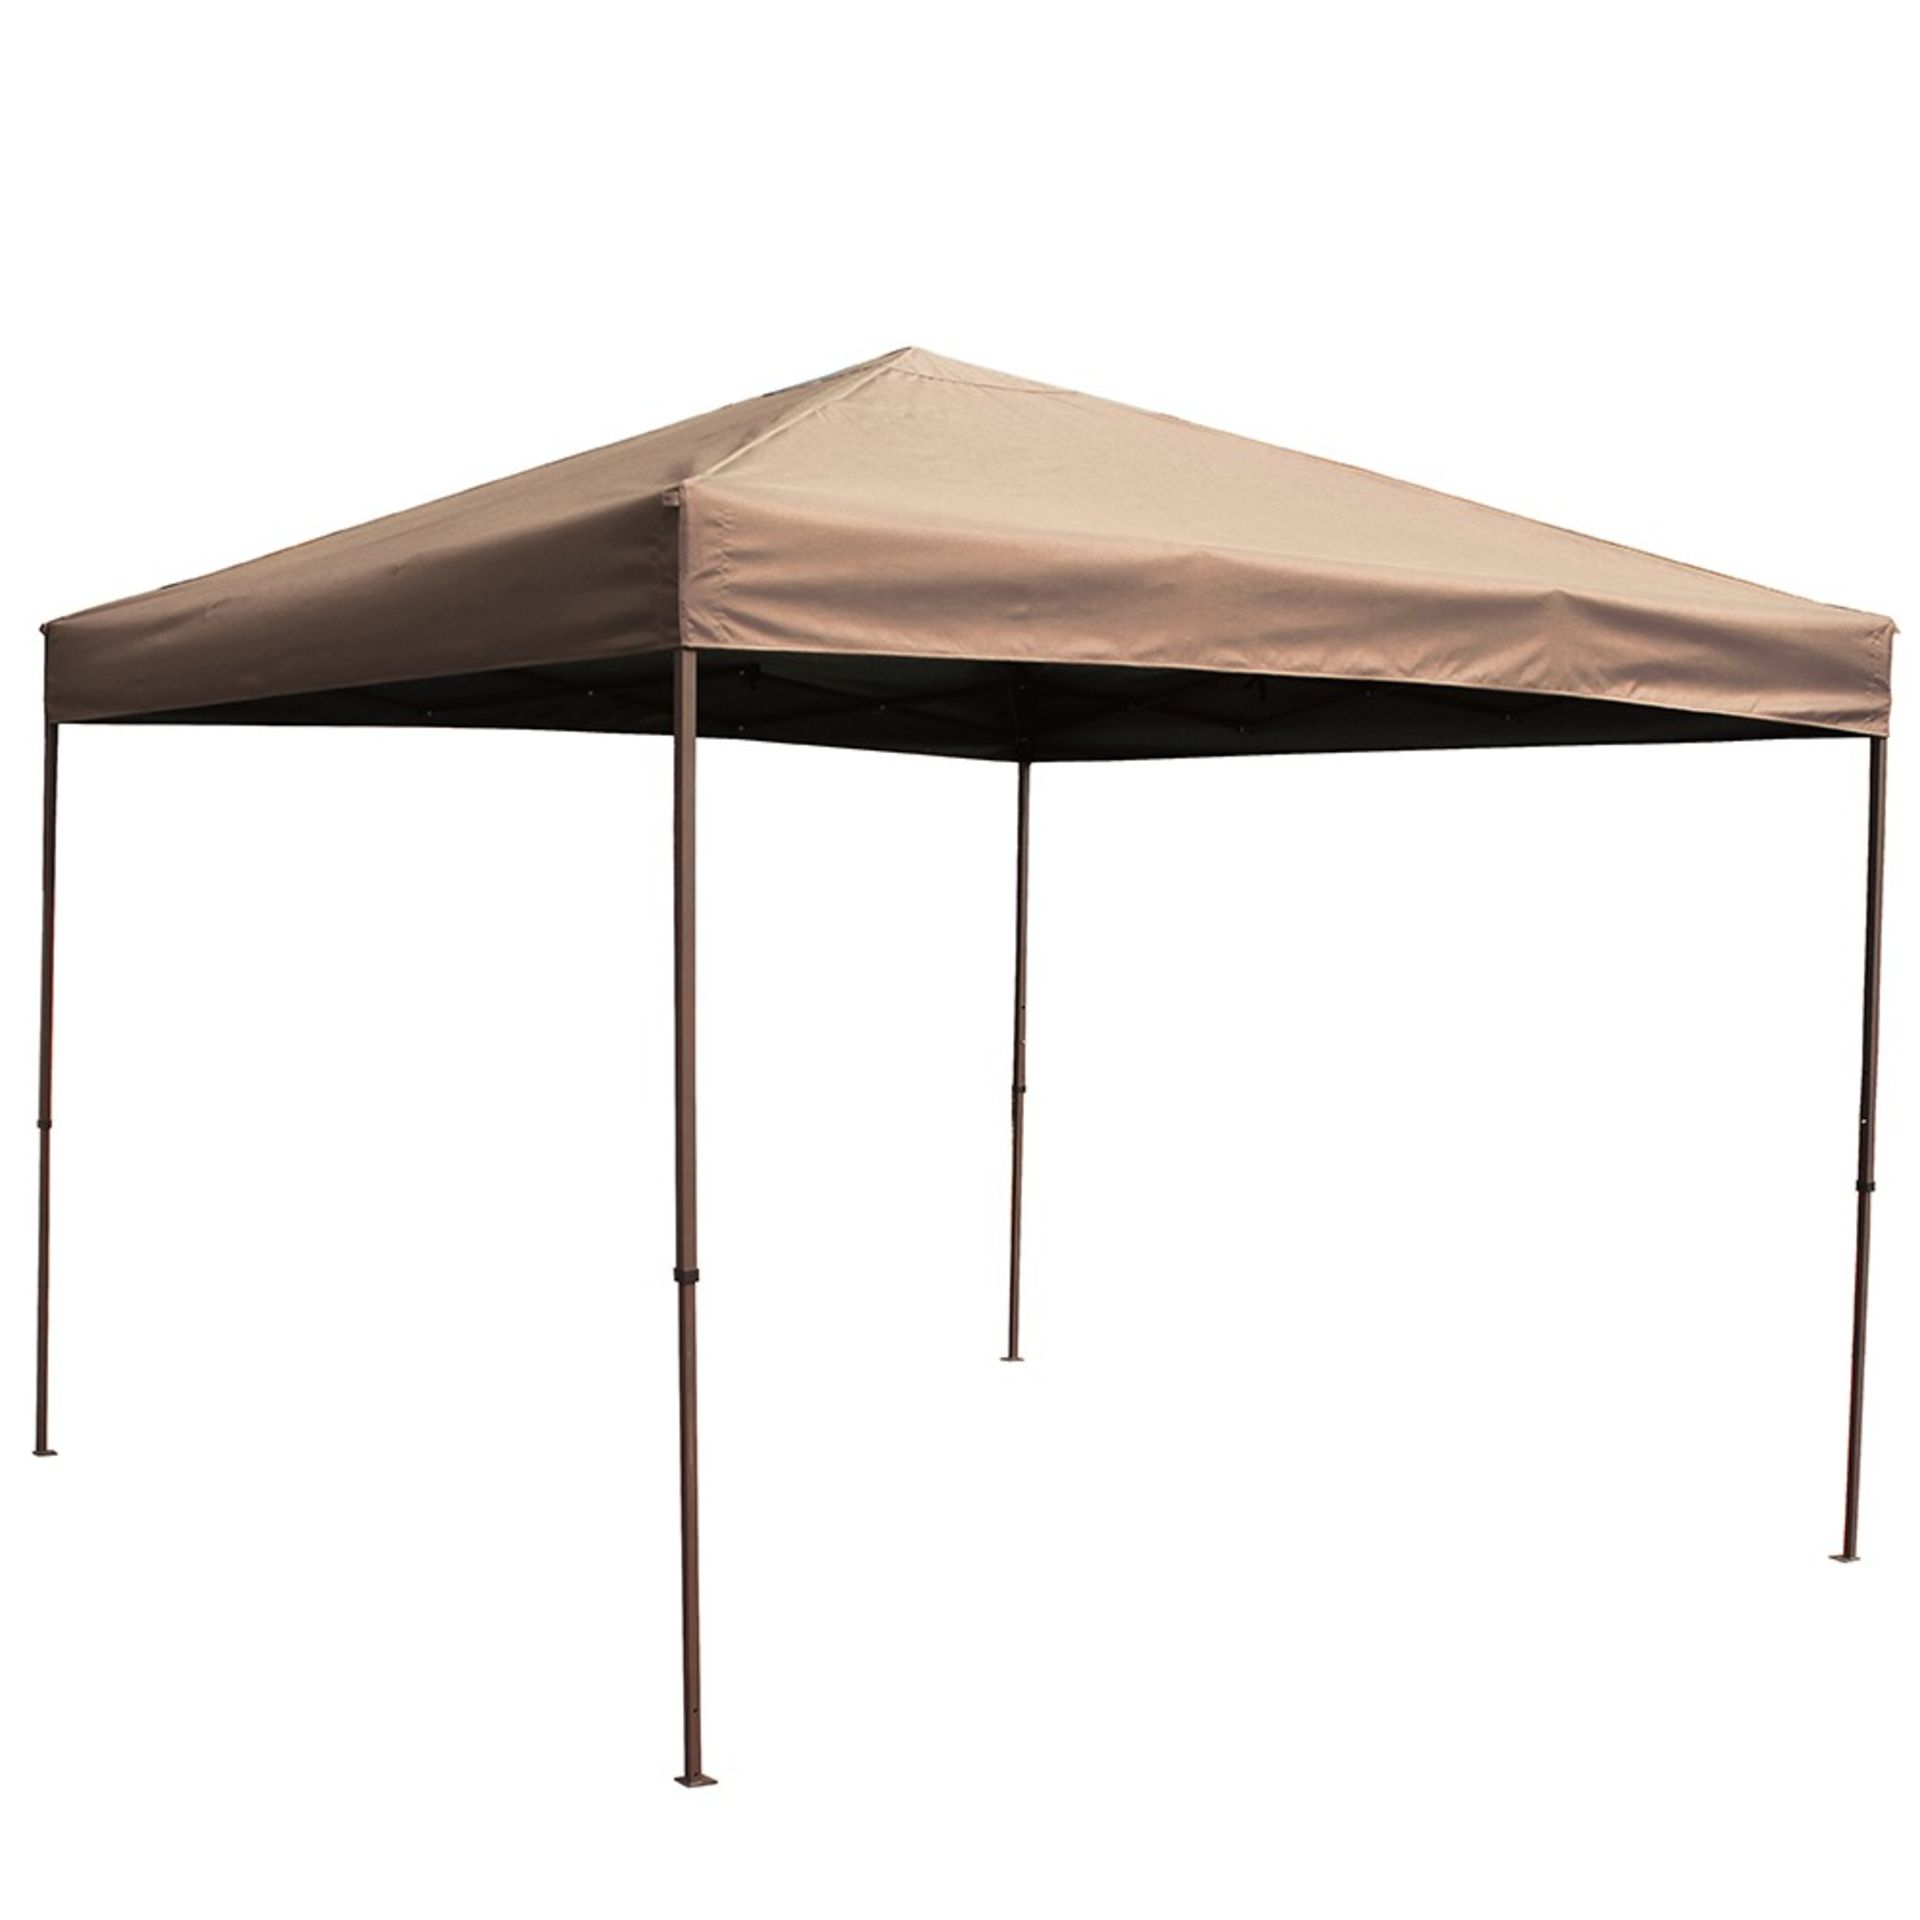 V Brand New Pop Up 3m x 3m Showerproof Gazebo Taupe - With Carry Case Isp £99 (Furnituredirect)